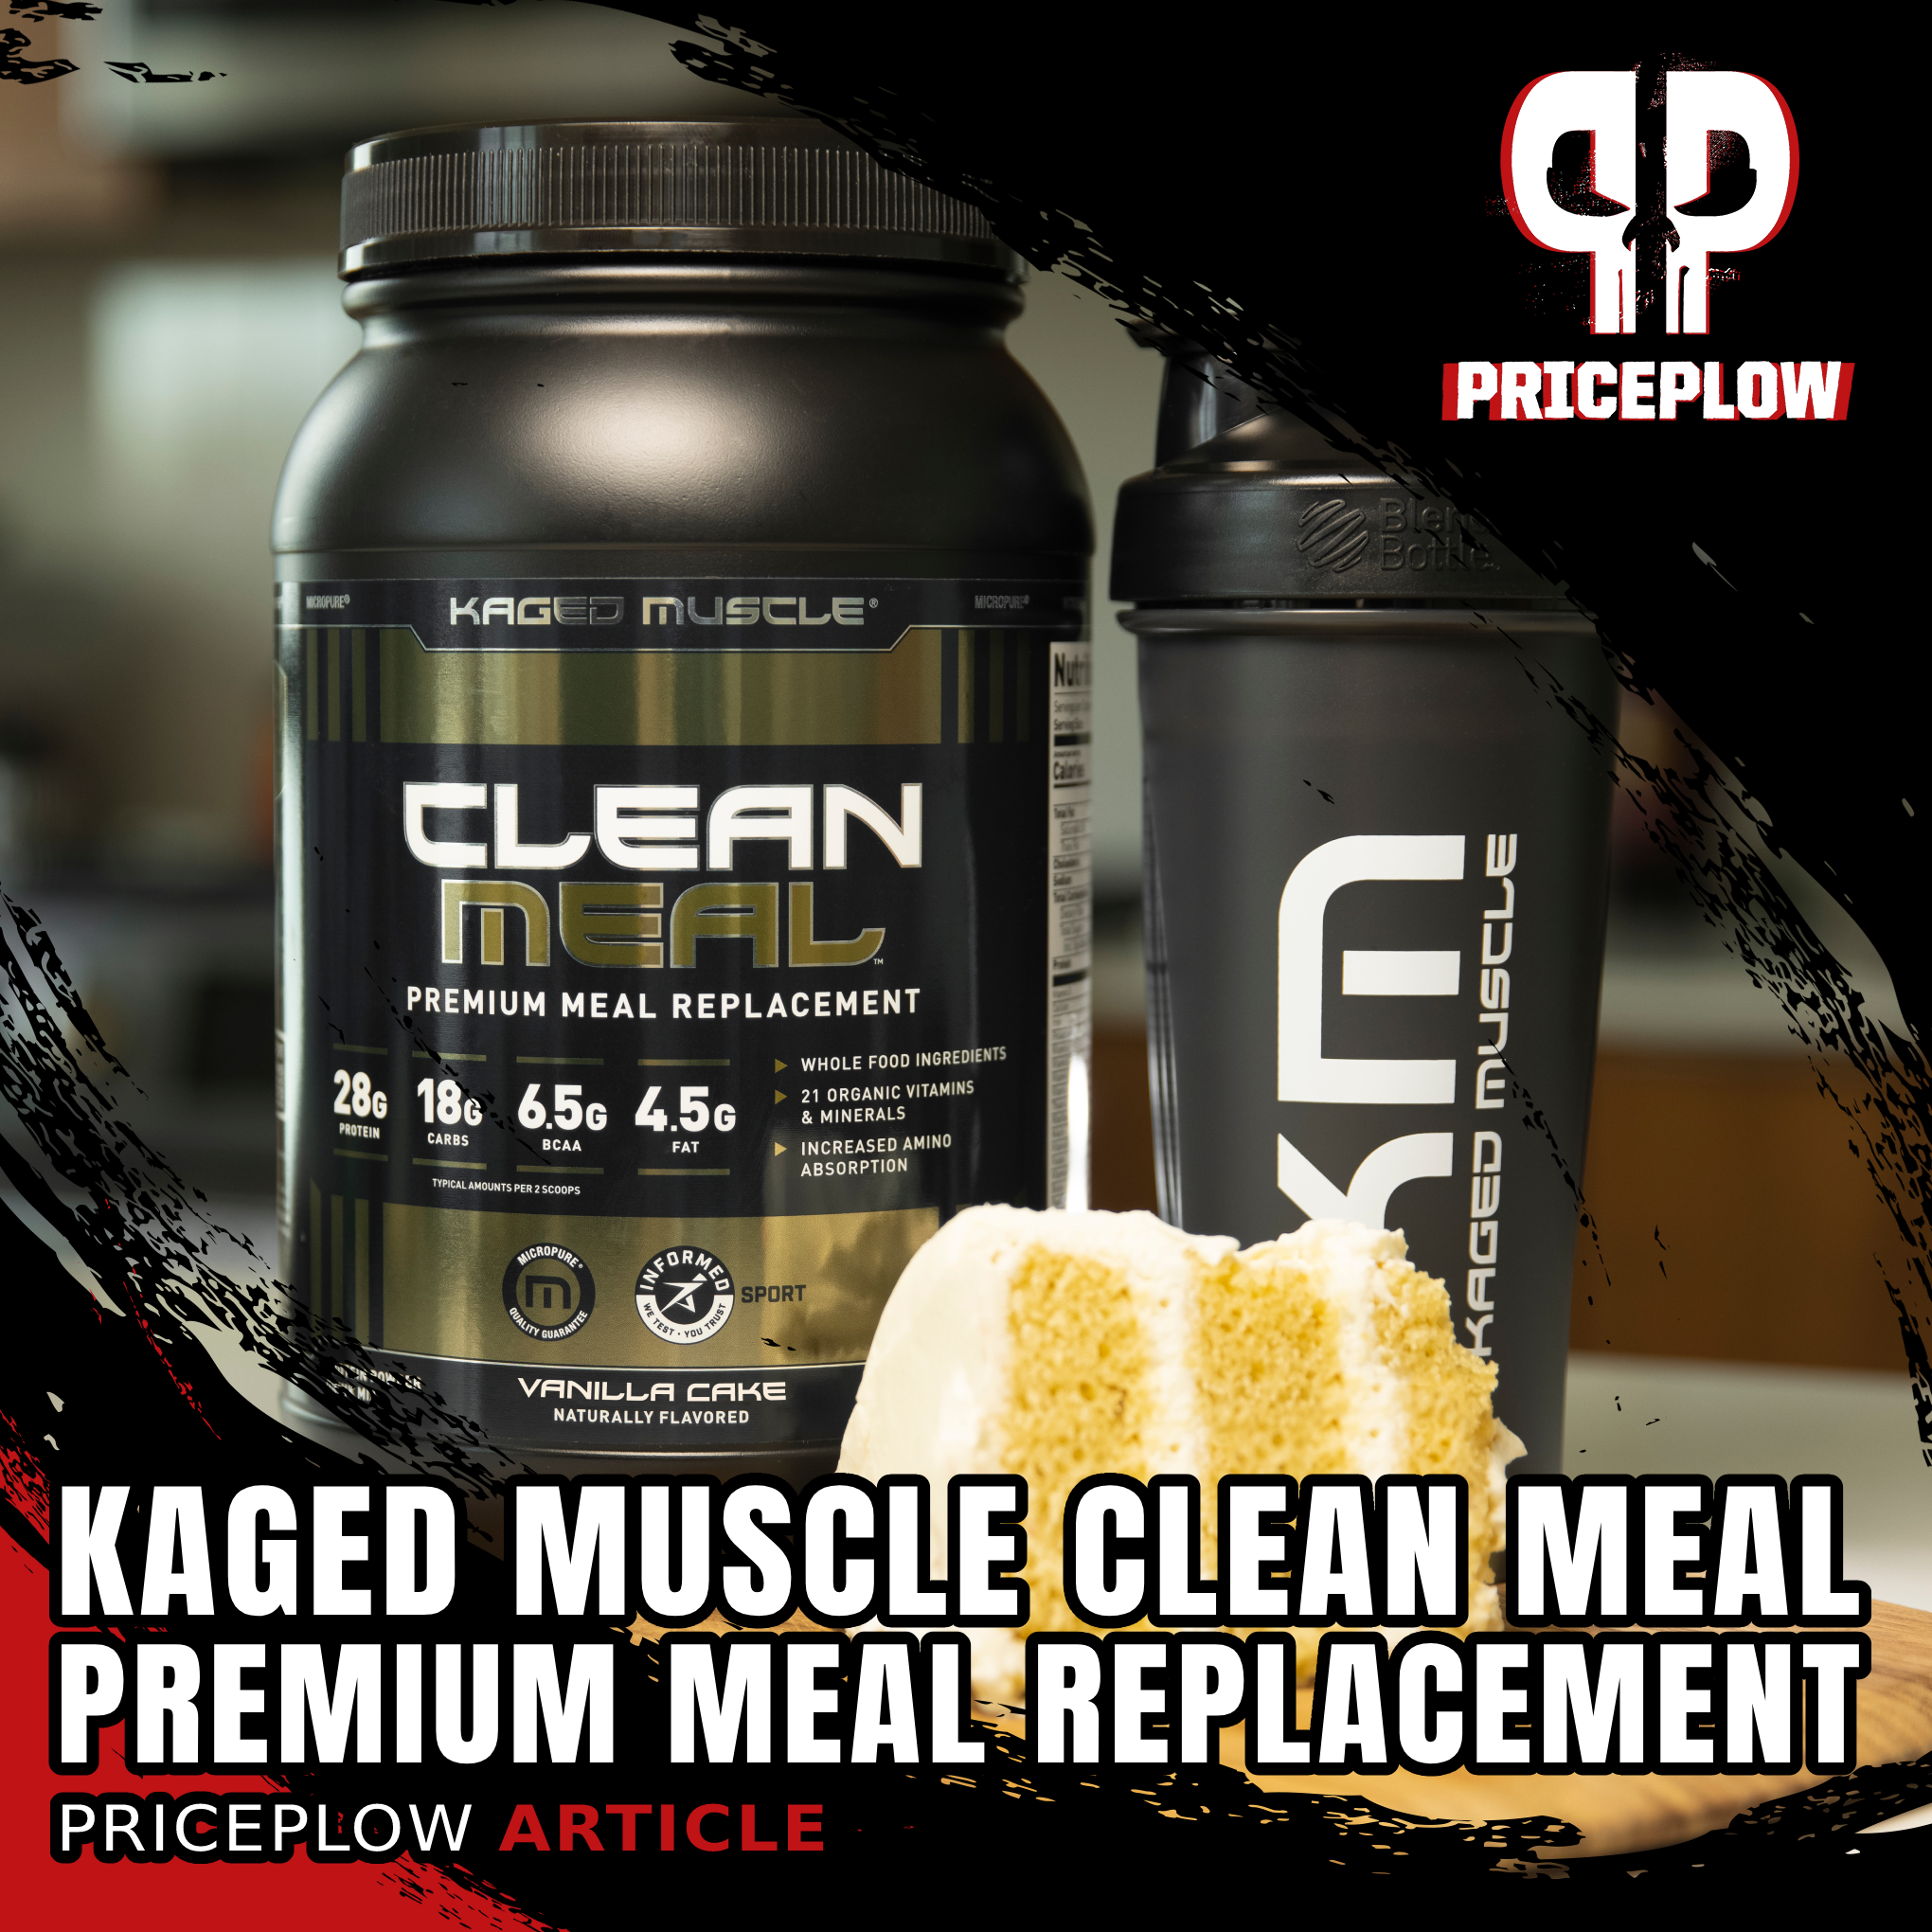 Kaged Muscle Clean Meal PricePlow